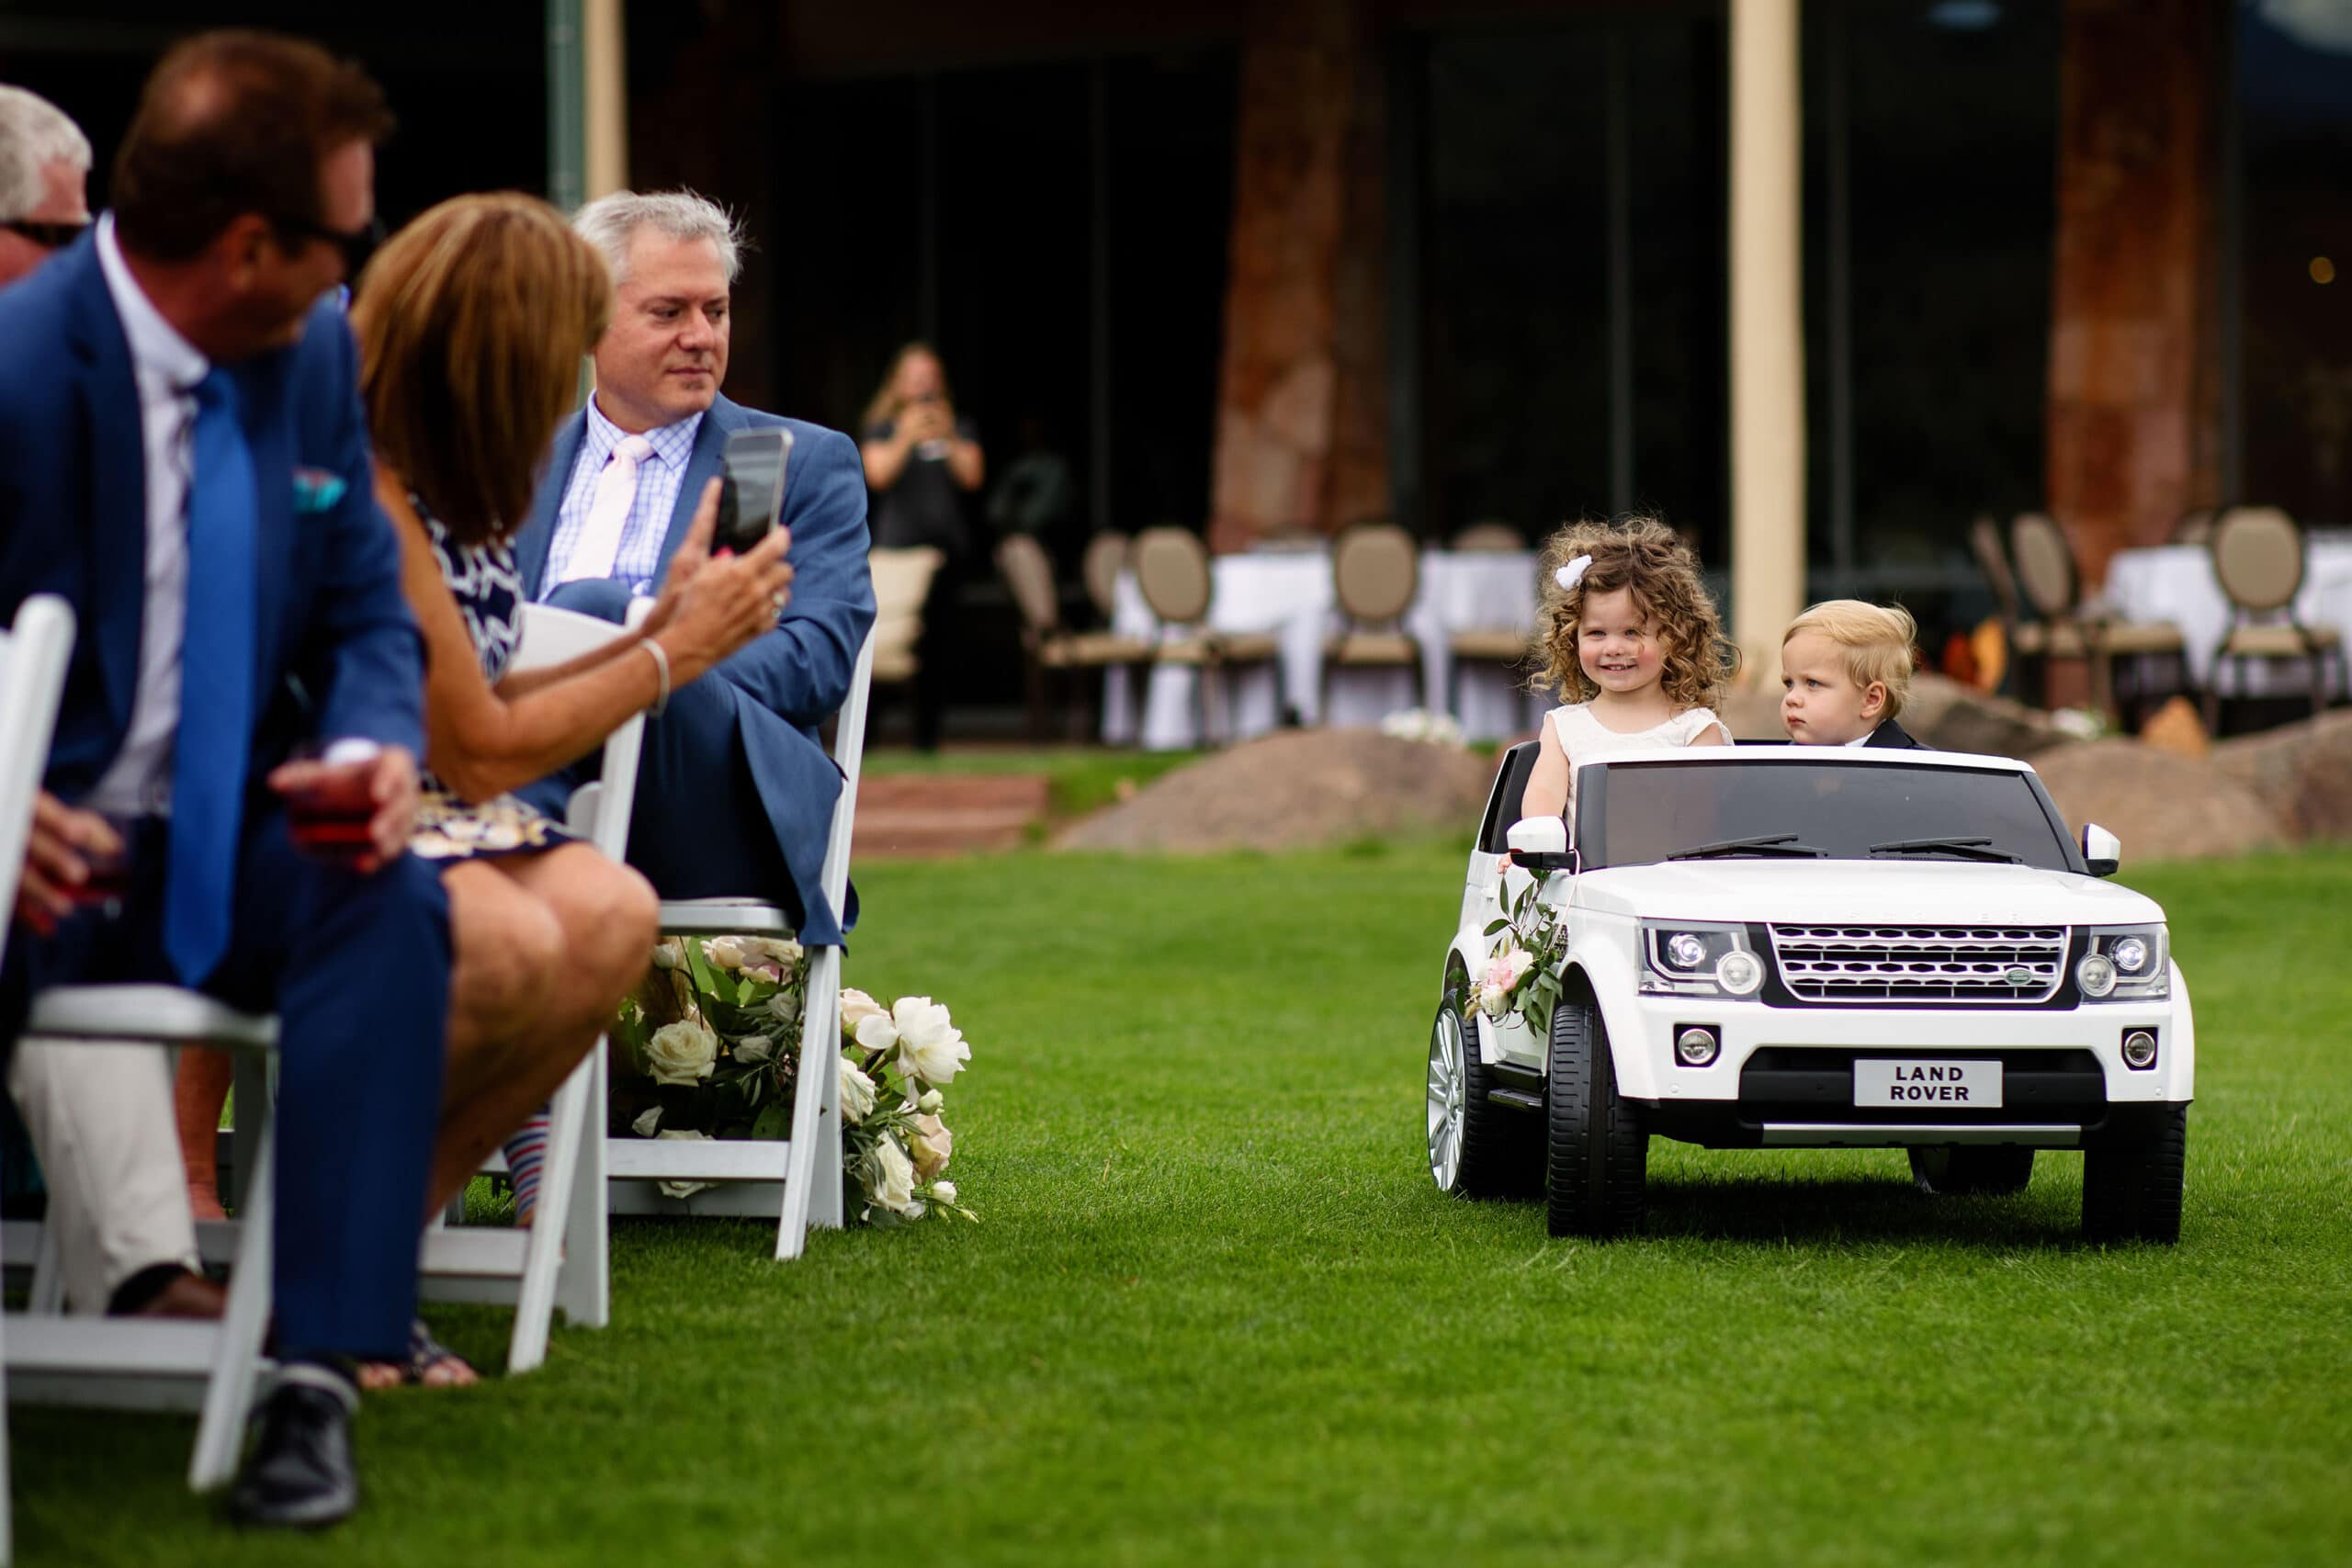 Kids drive down the ceremony aisle in a toy Range Rover at Garden of the Gods Resort